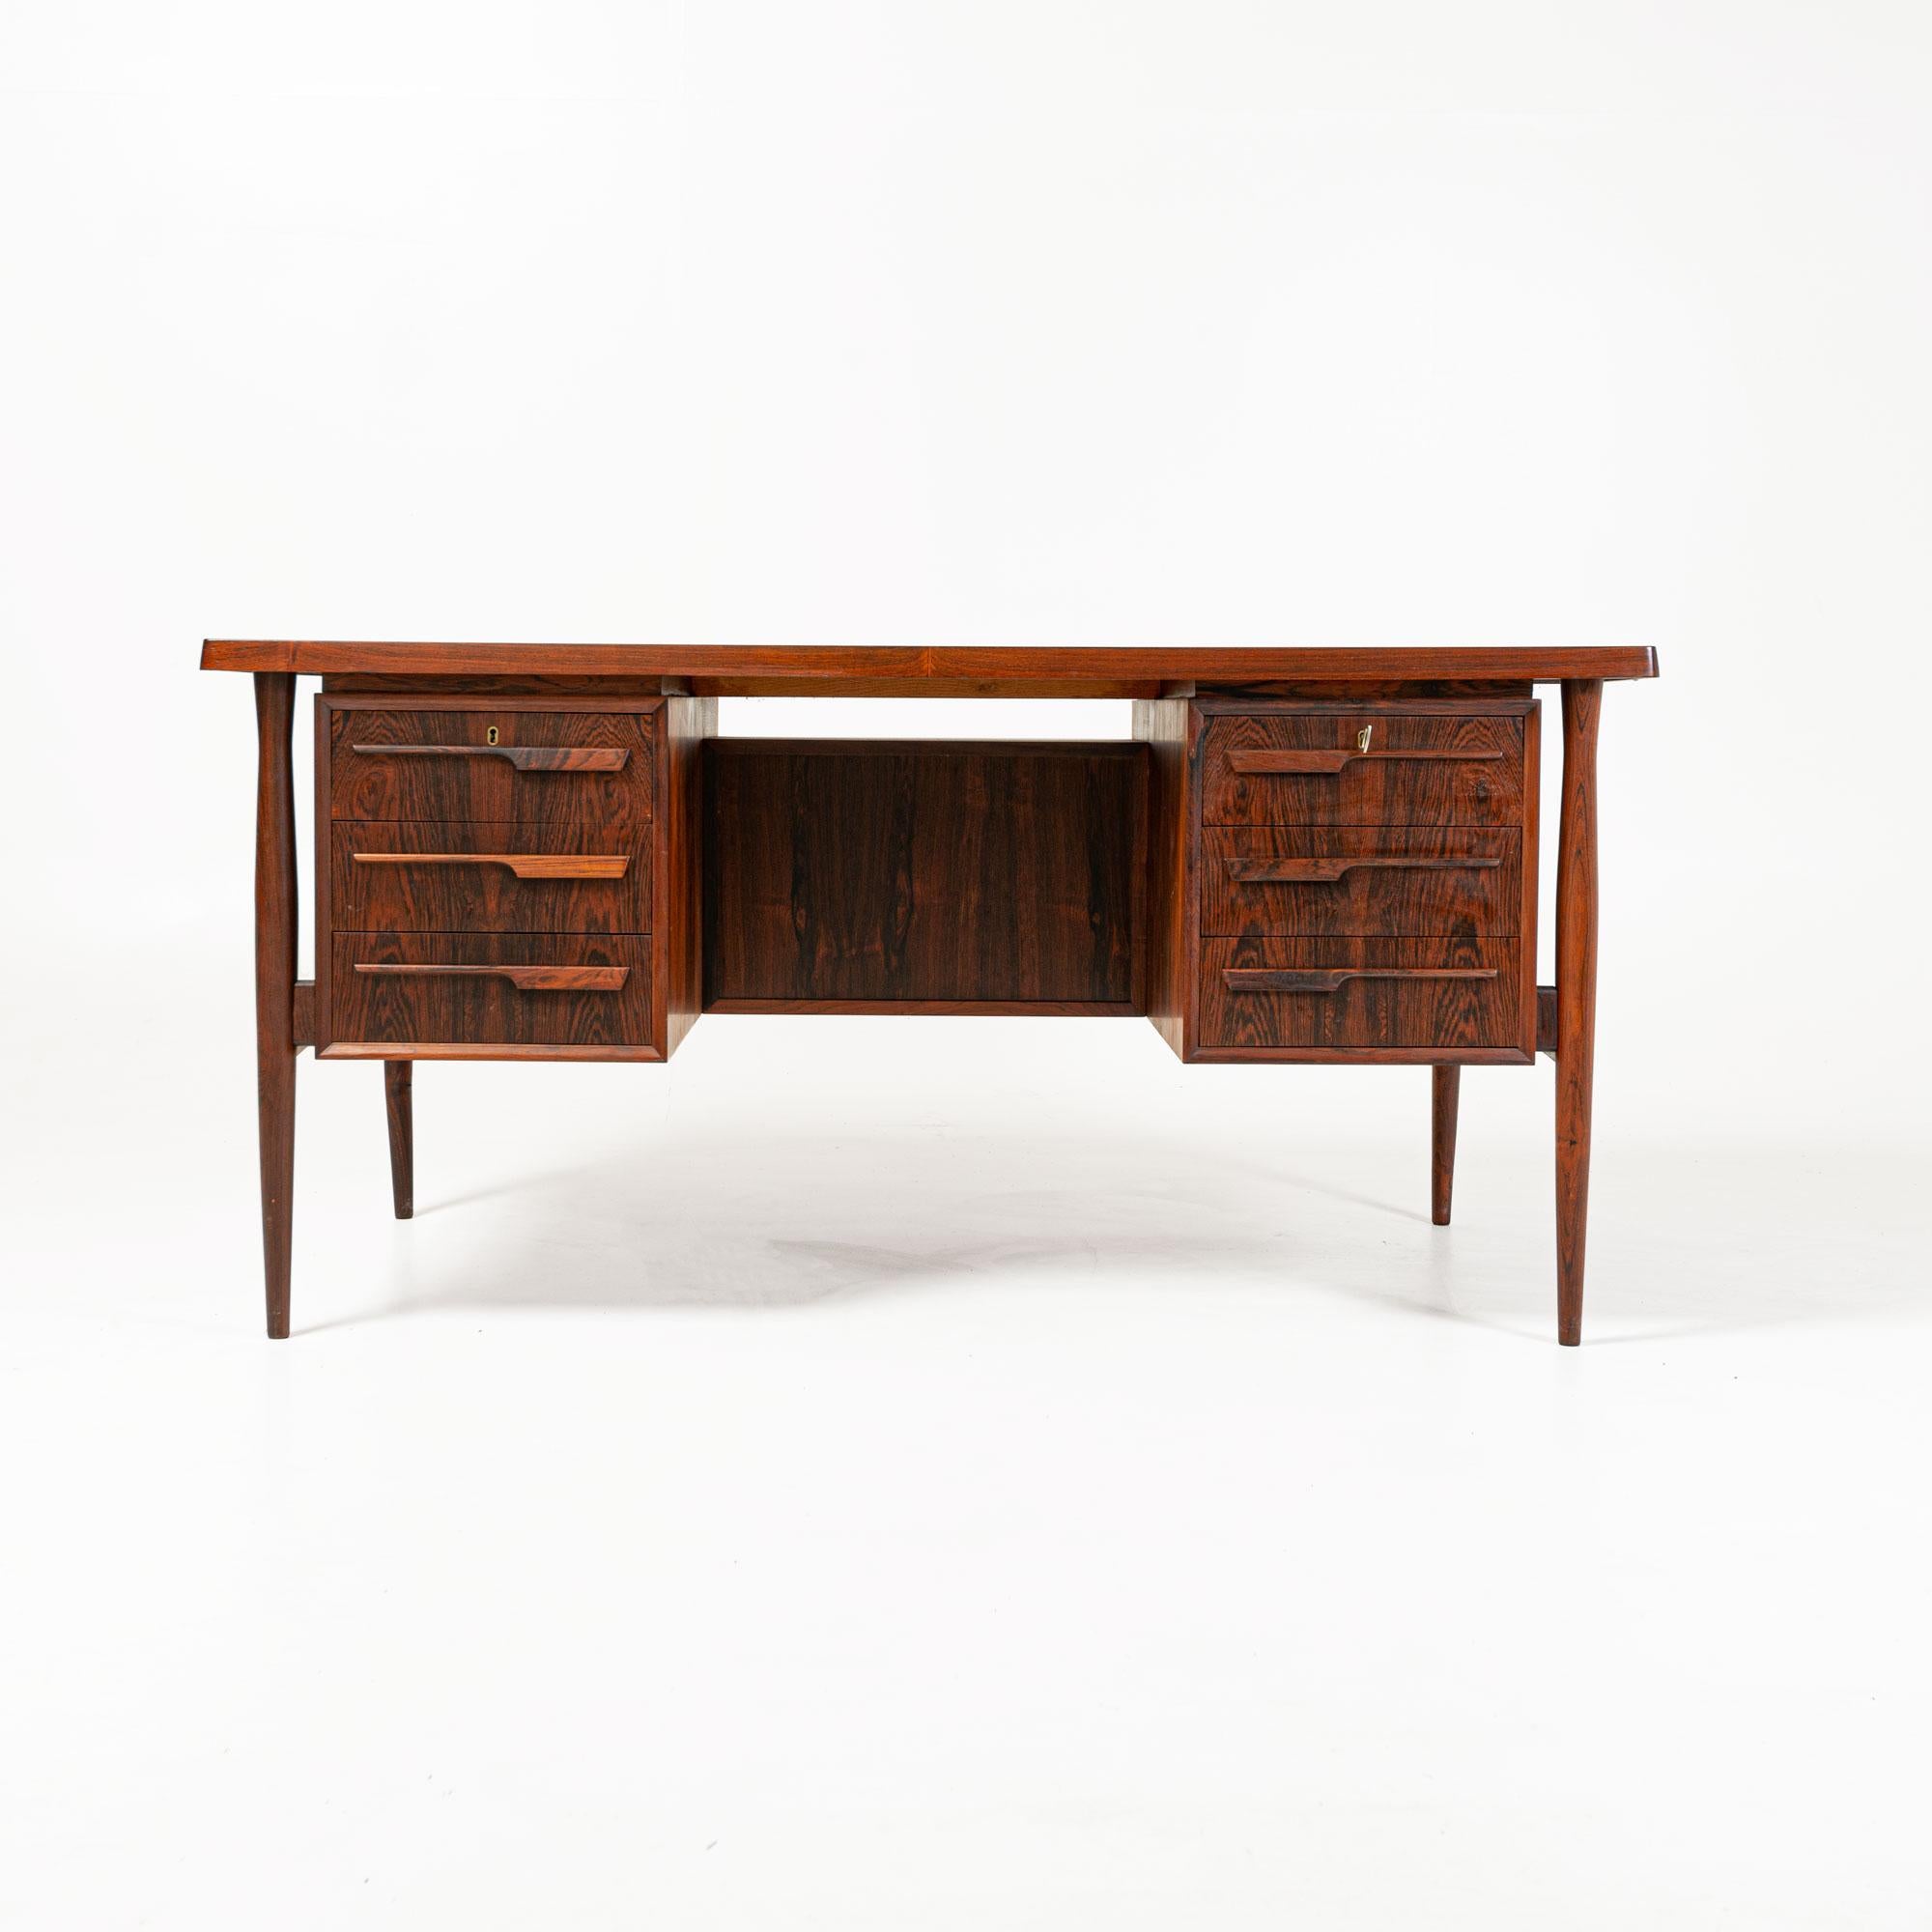 An unusual free standing Danish rosewood desk designed in the manner of Arne Vodder. 

Arne Vodder was trained by Finn Juhl, who became his friend and business partner. Before concentrating on furniture alone, in 1951 he opened his own studio with